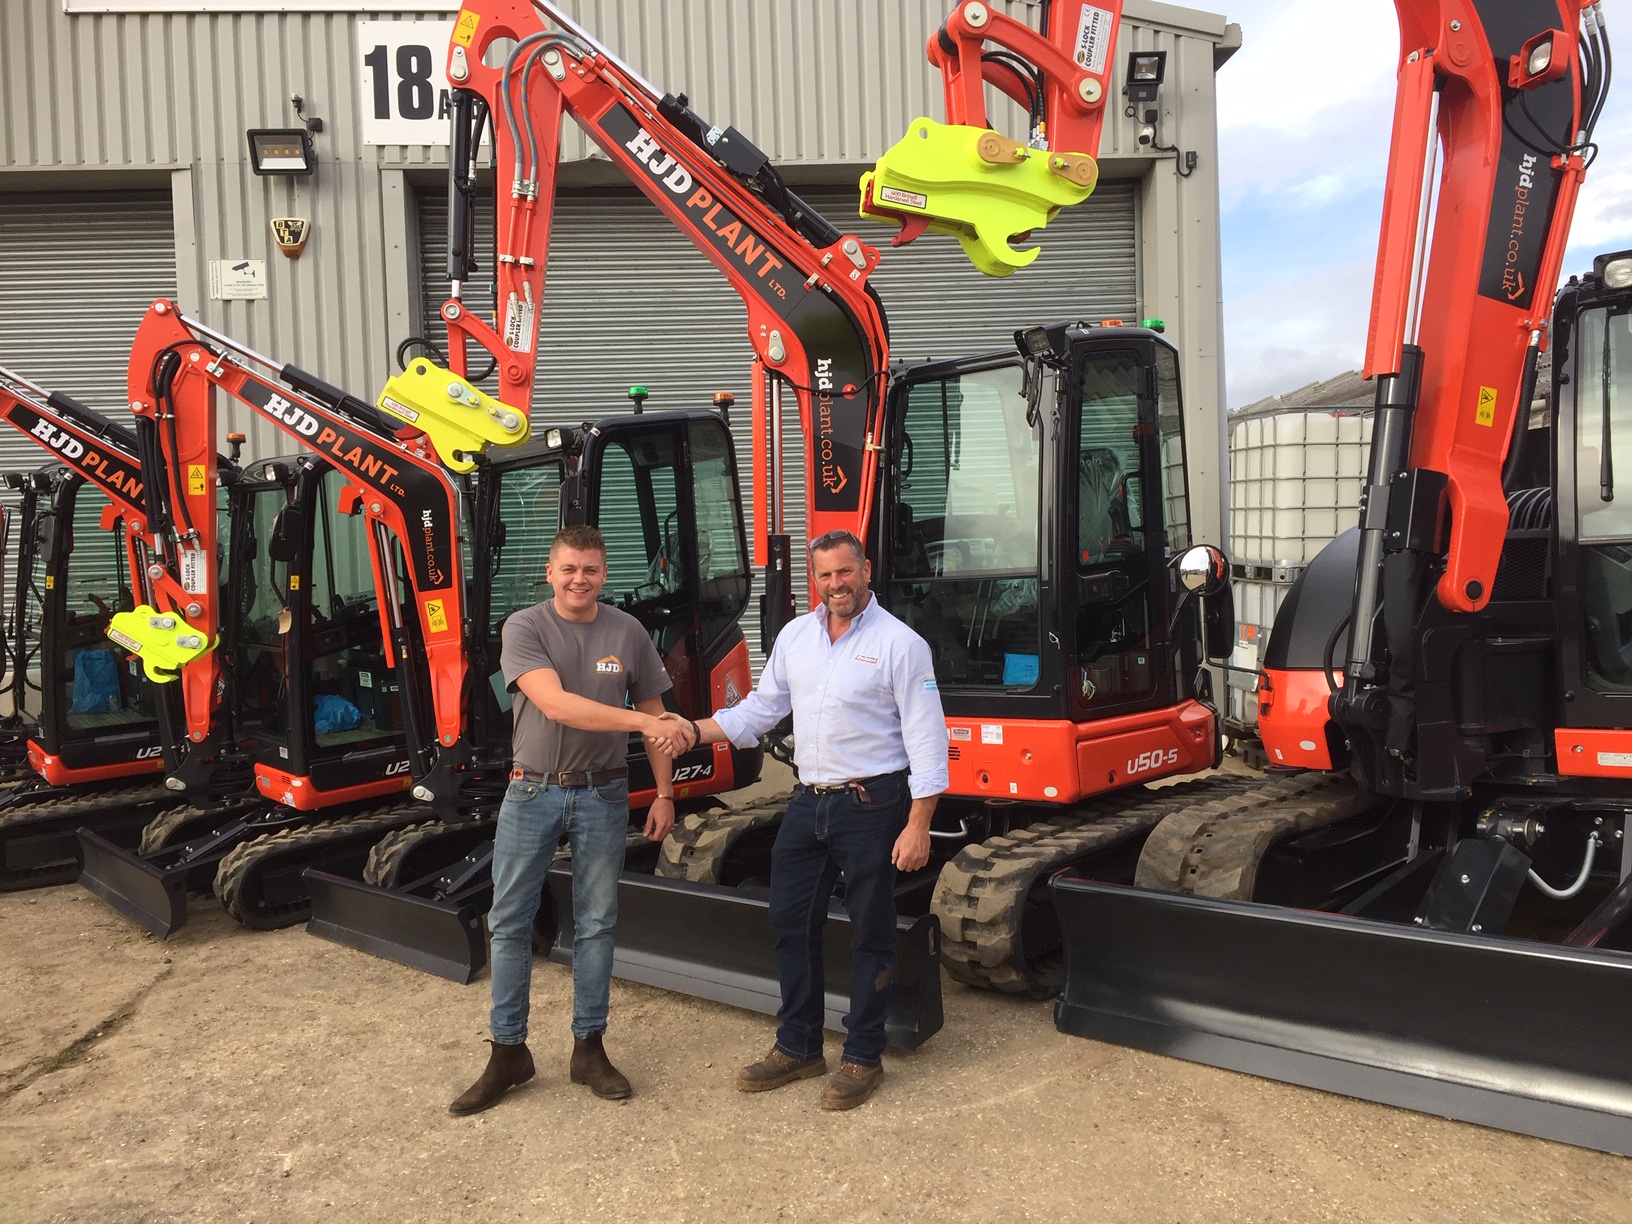 Kubota helps launch new plant solutions company